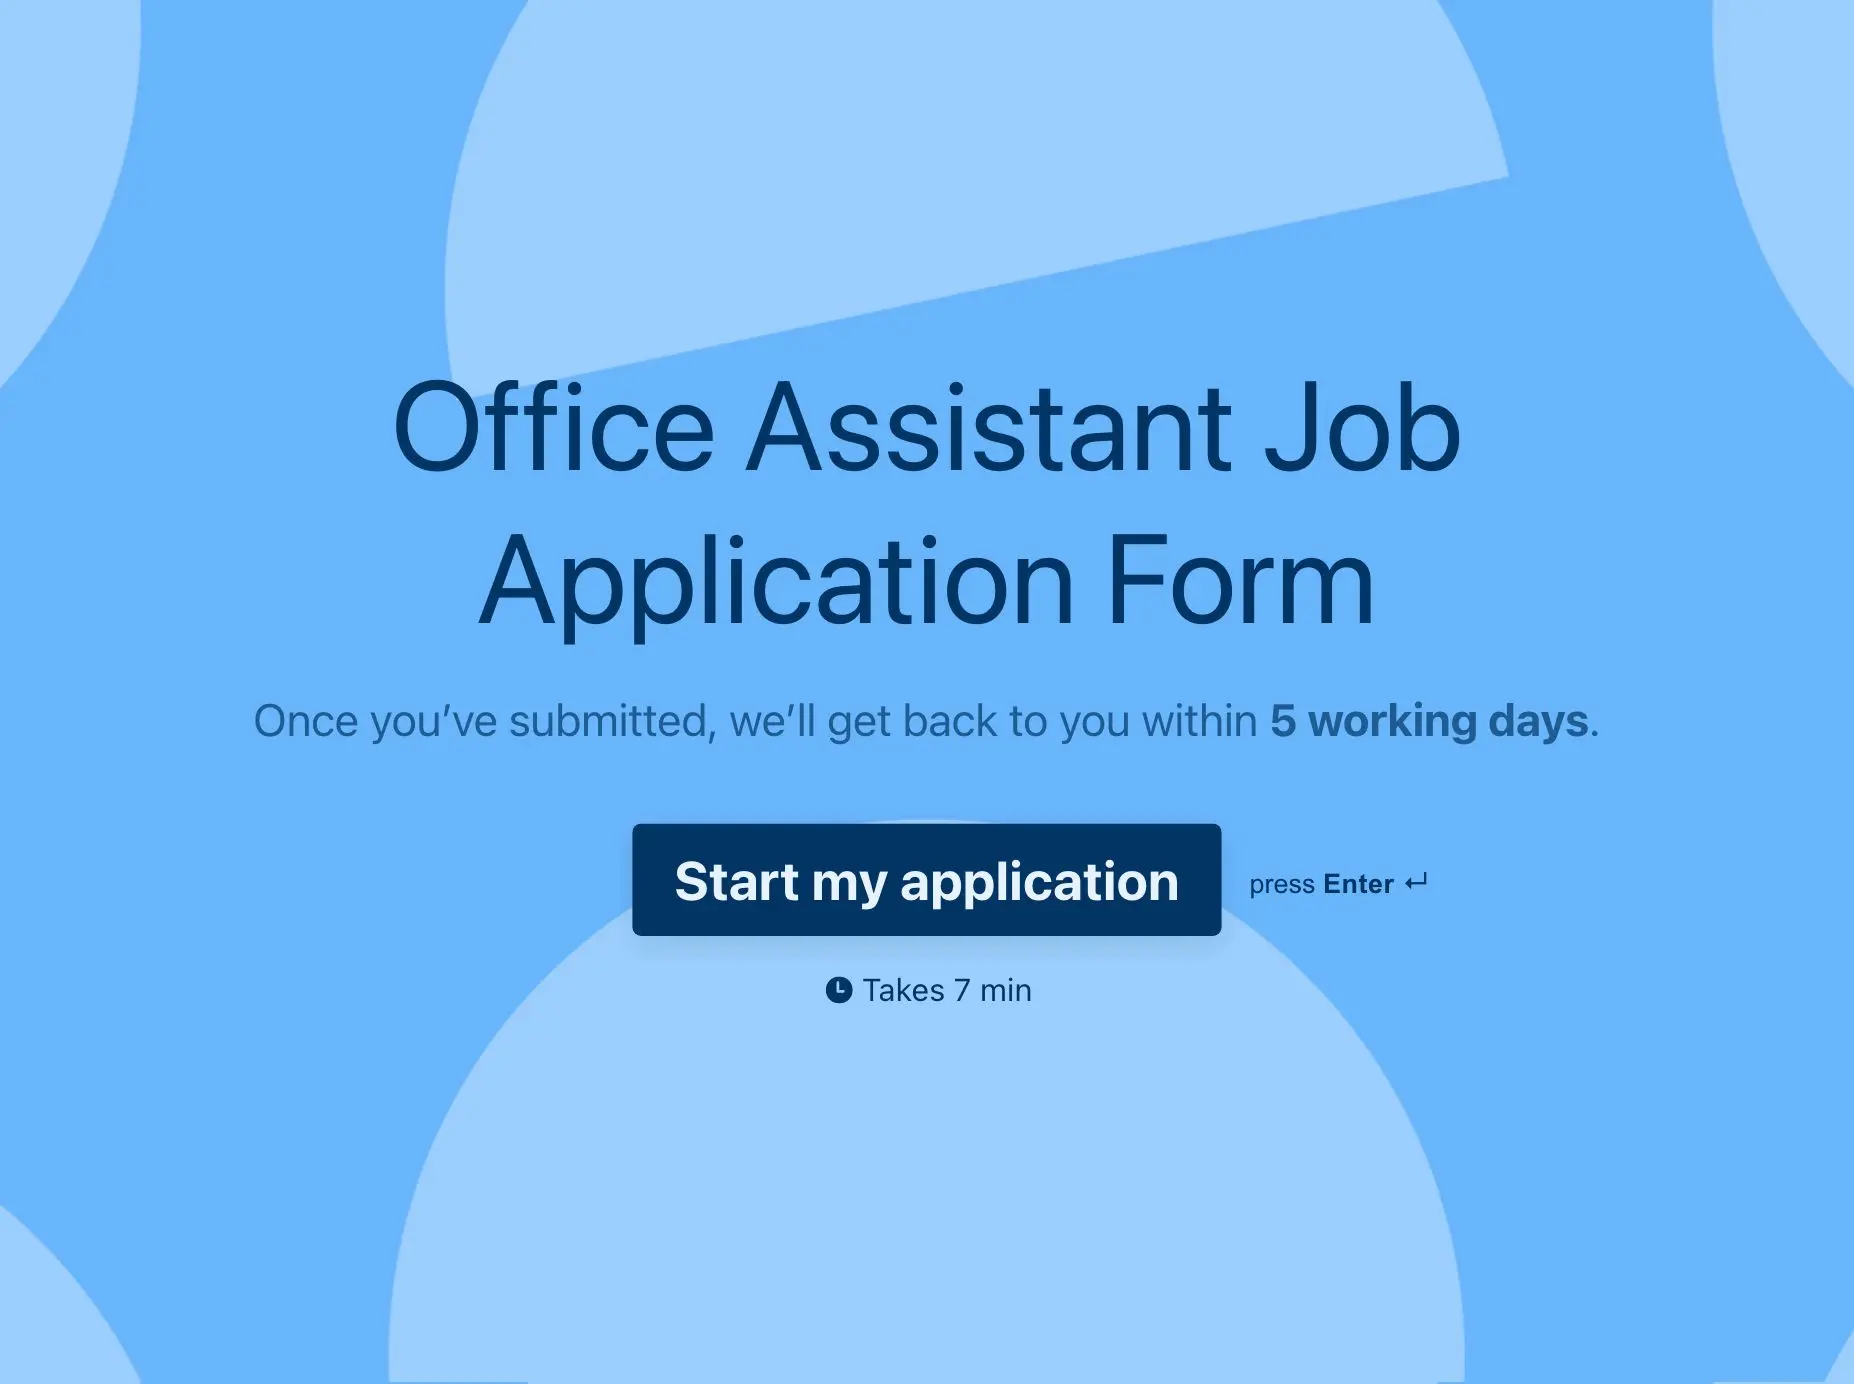 Office Assistant Job Application Form Template 9926